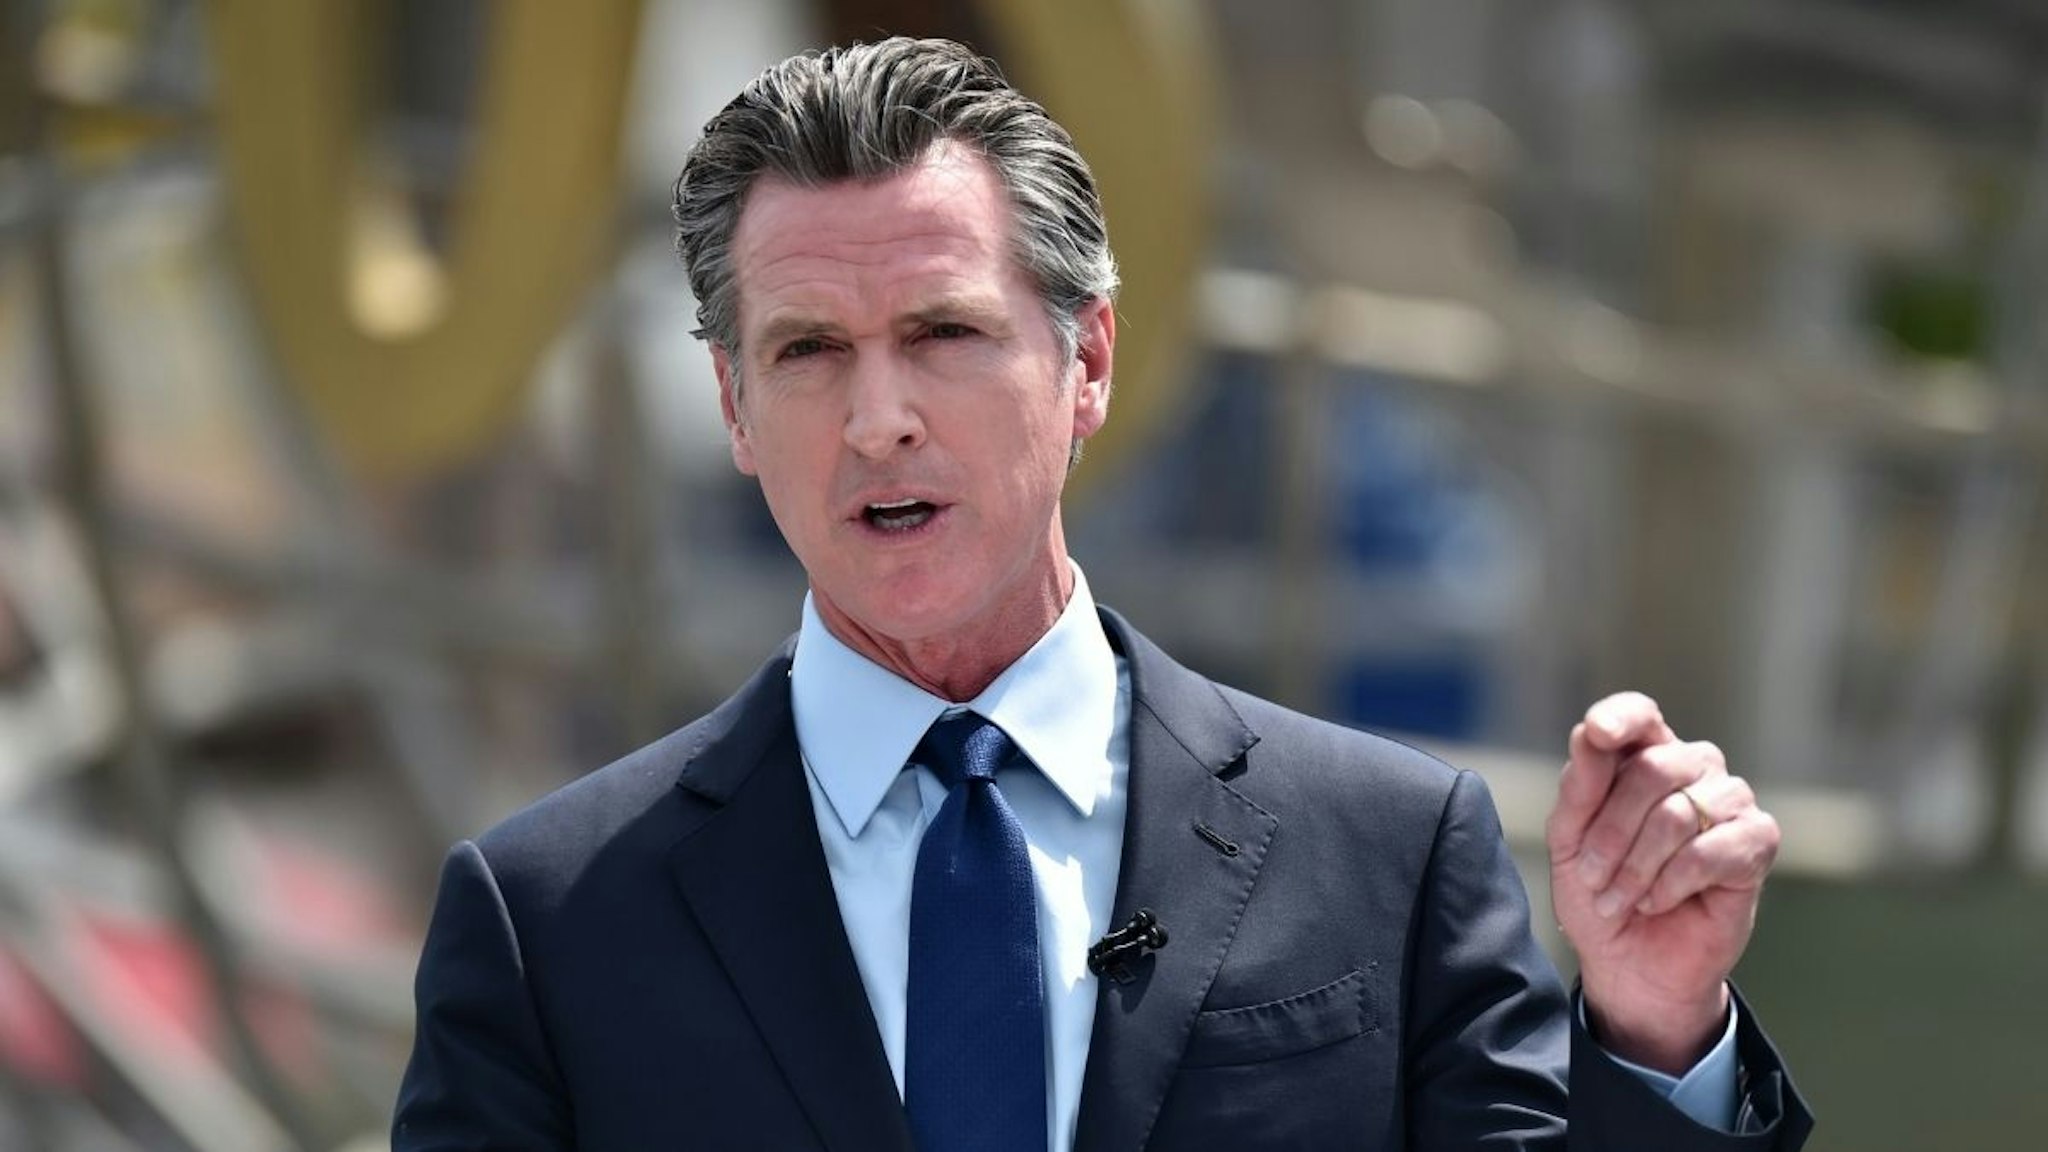 California Governor Gavin Newsom attends California Governor Gavin Newsom's press conference for the official reopening of the state of California at Universal Studios Hollywood on June 15, 2021 in Universal City, California.